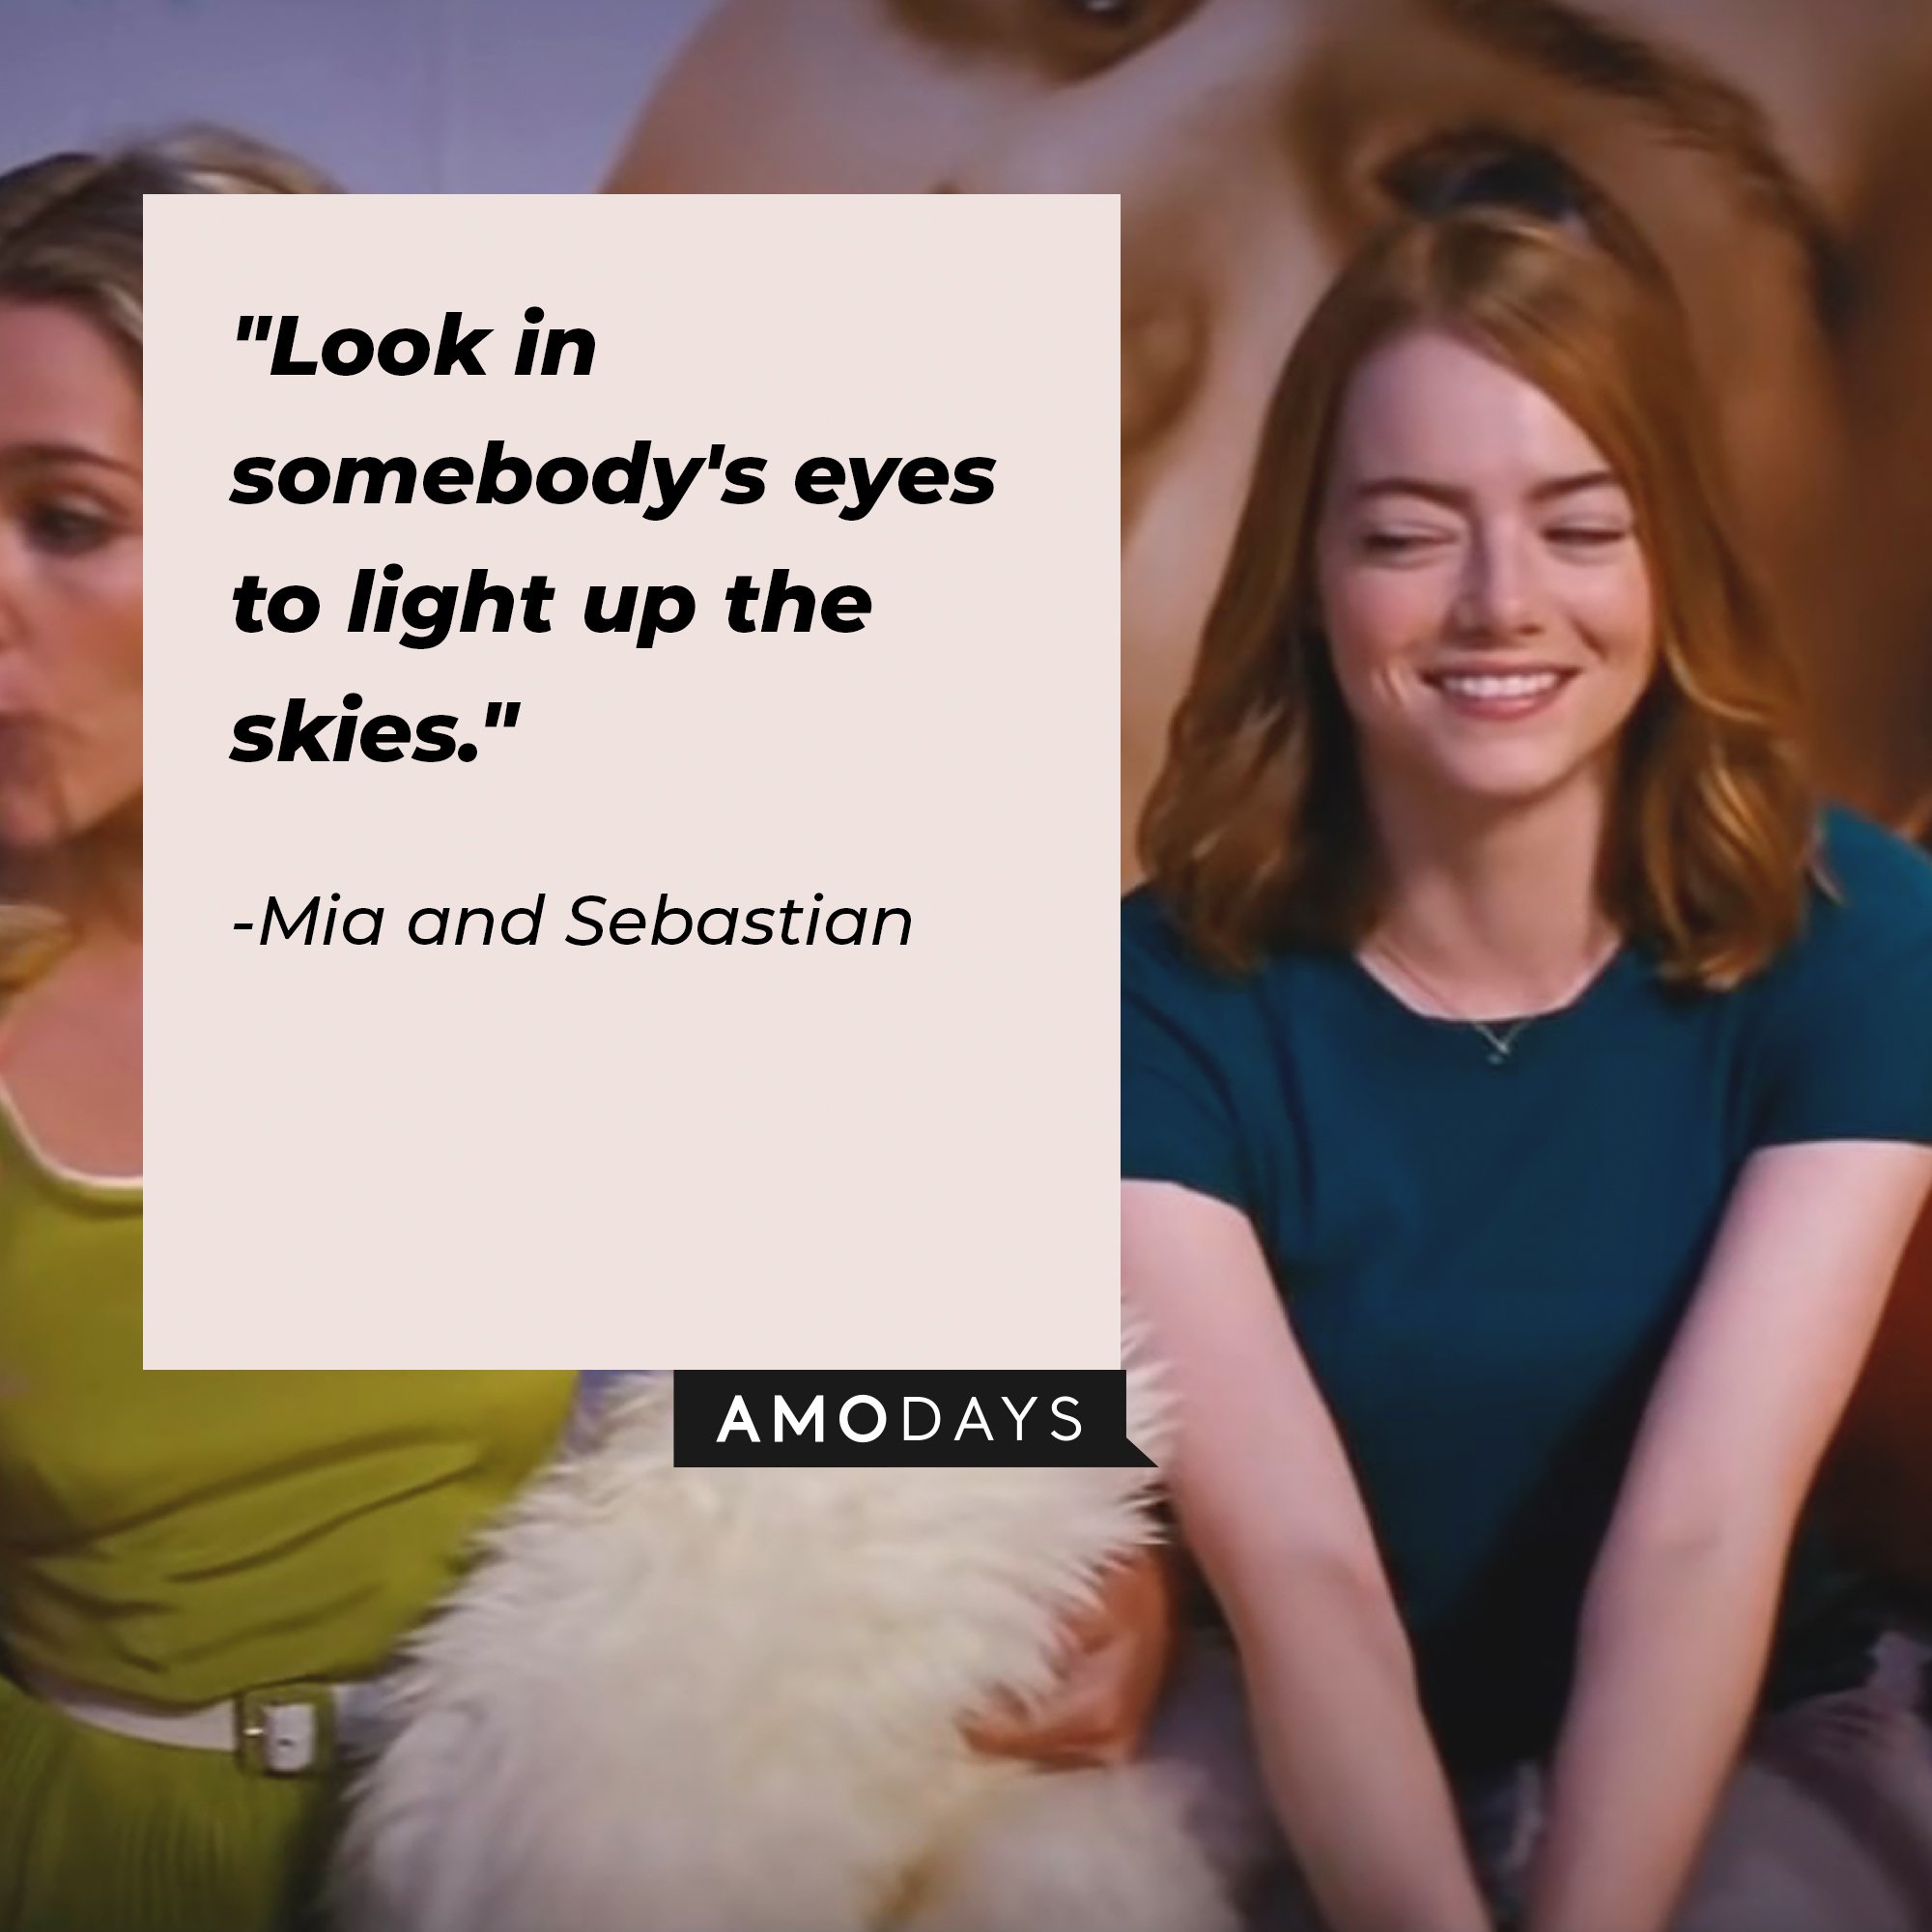 Mia and Sebastian's quote: "Look in somebody's eyes to light up the skies." | Image: AmoDays